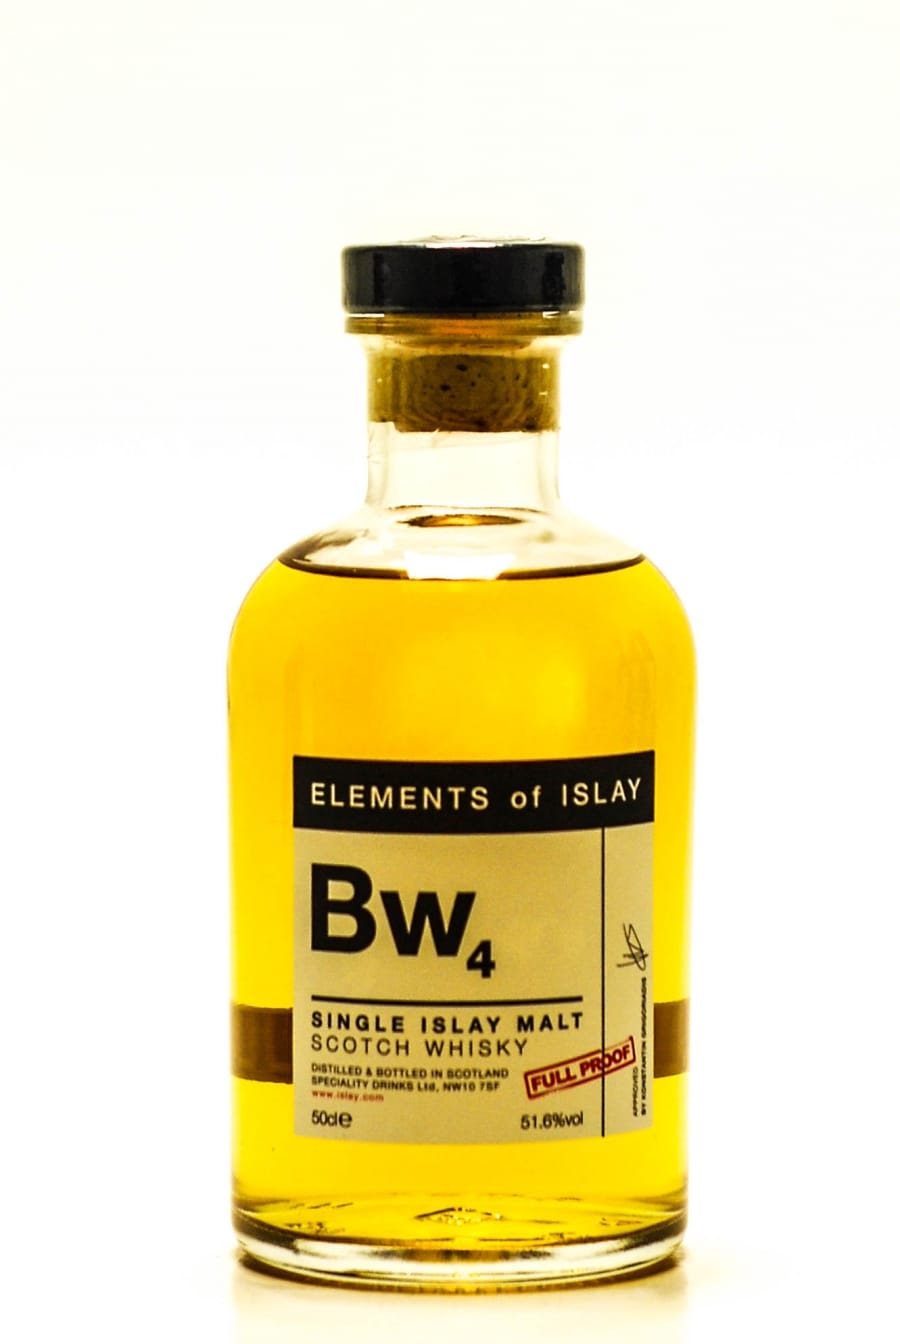 Bowmore - Bw4 Speciality Drinks Elements of Islay 51.6% NAS